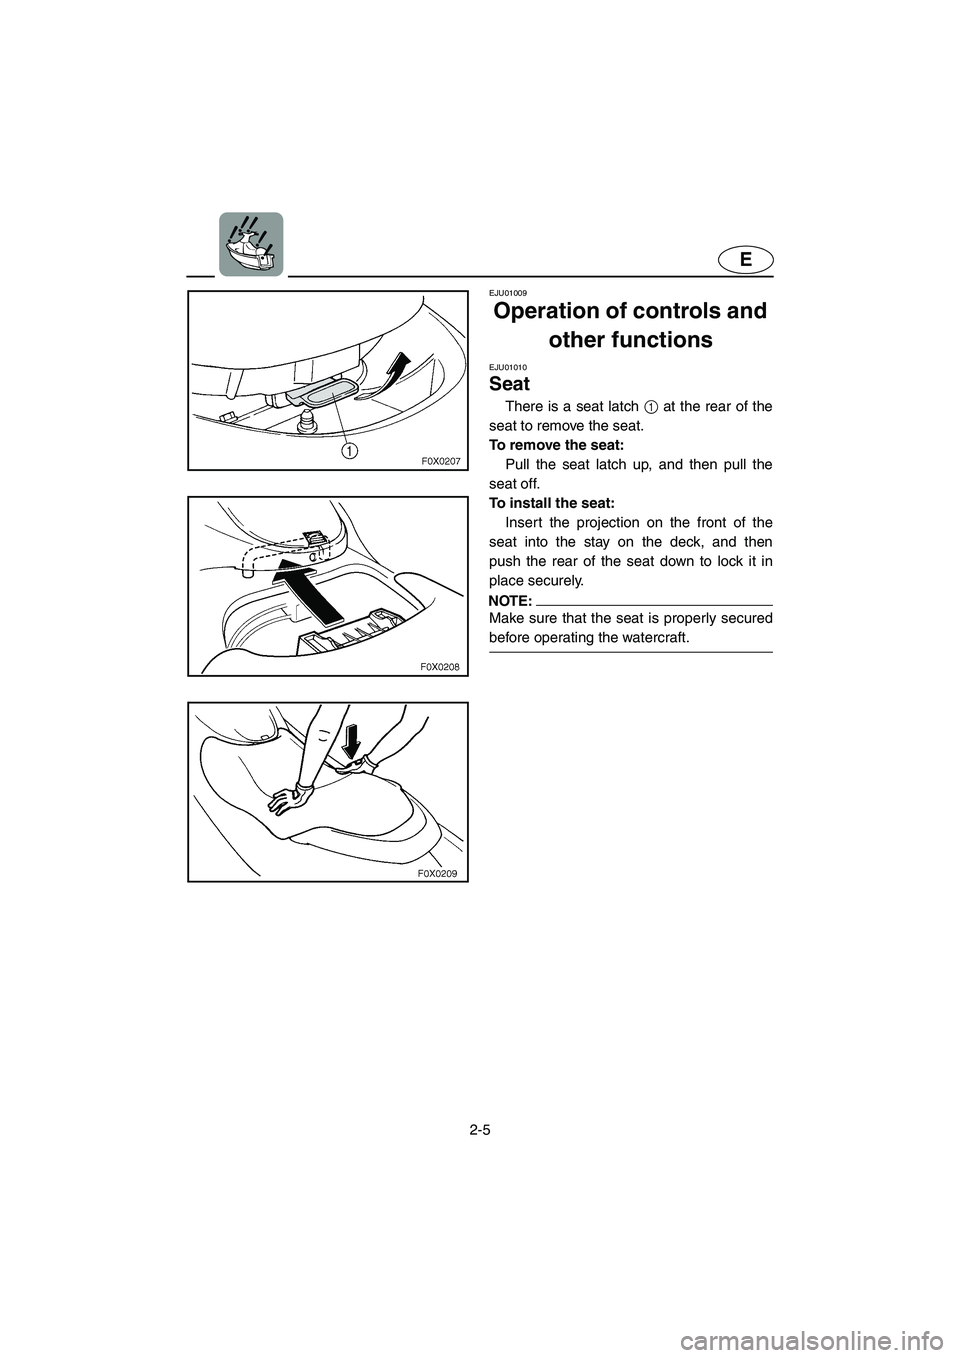 YAMAHA GP800R 2003 Owners Manual 2-5
E
EJU01009 
Operation of controls and 
other functions 
EJU01010 
Seat  
There is a seat latch 1 at the rear of the
seat to remove the seat. 
To remove the seat: 
Pull the seat latch up, and then 